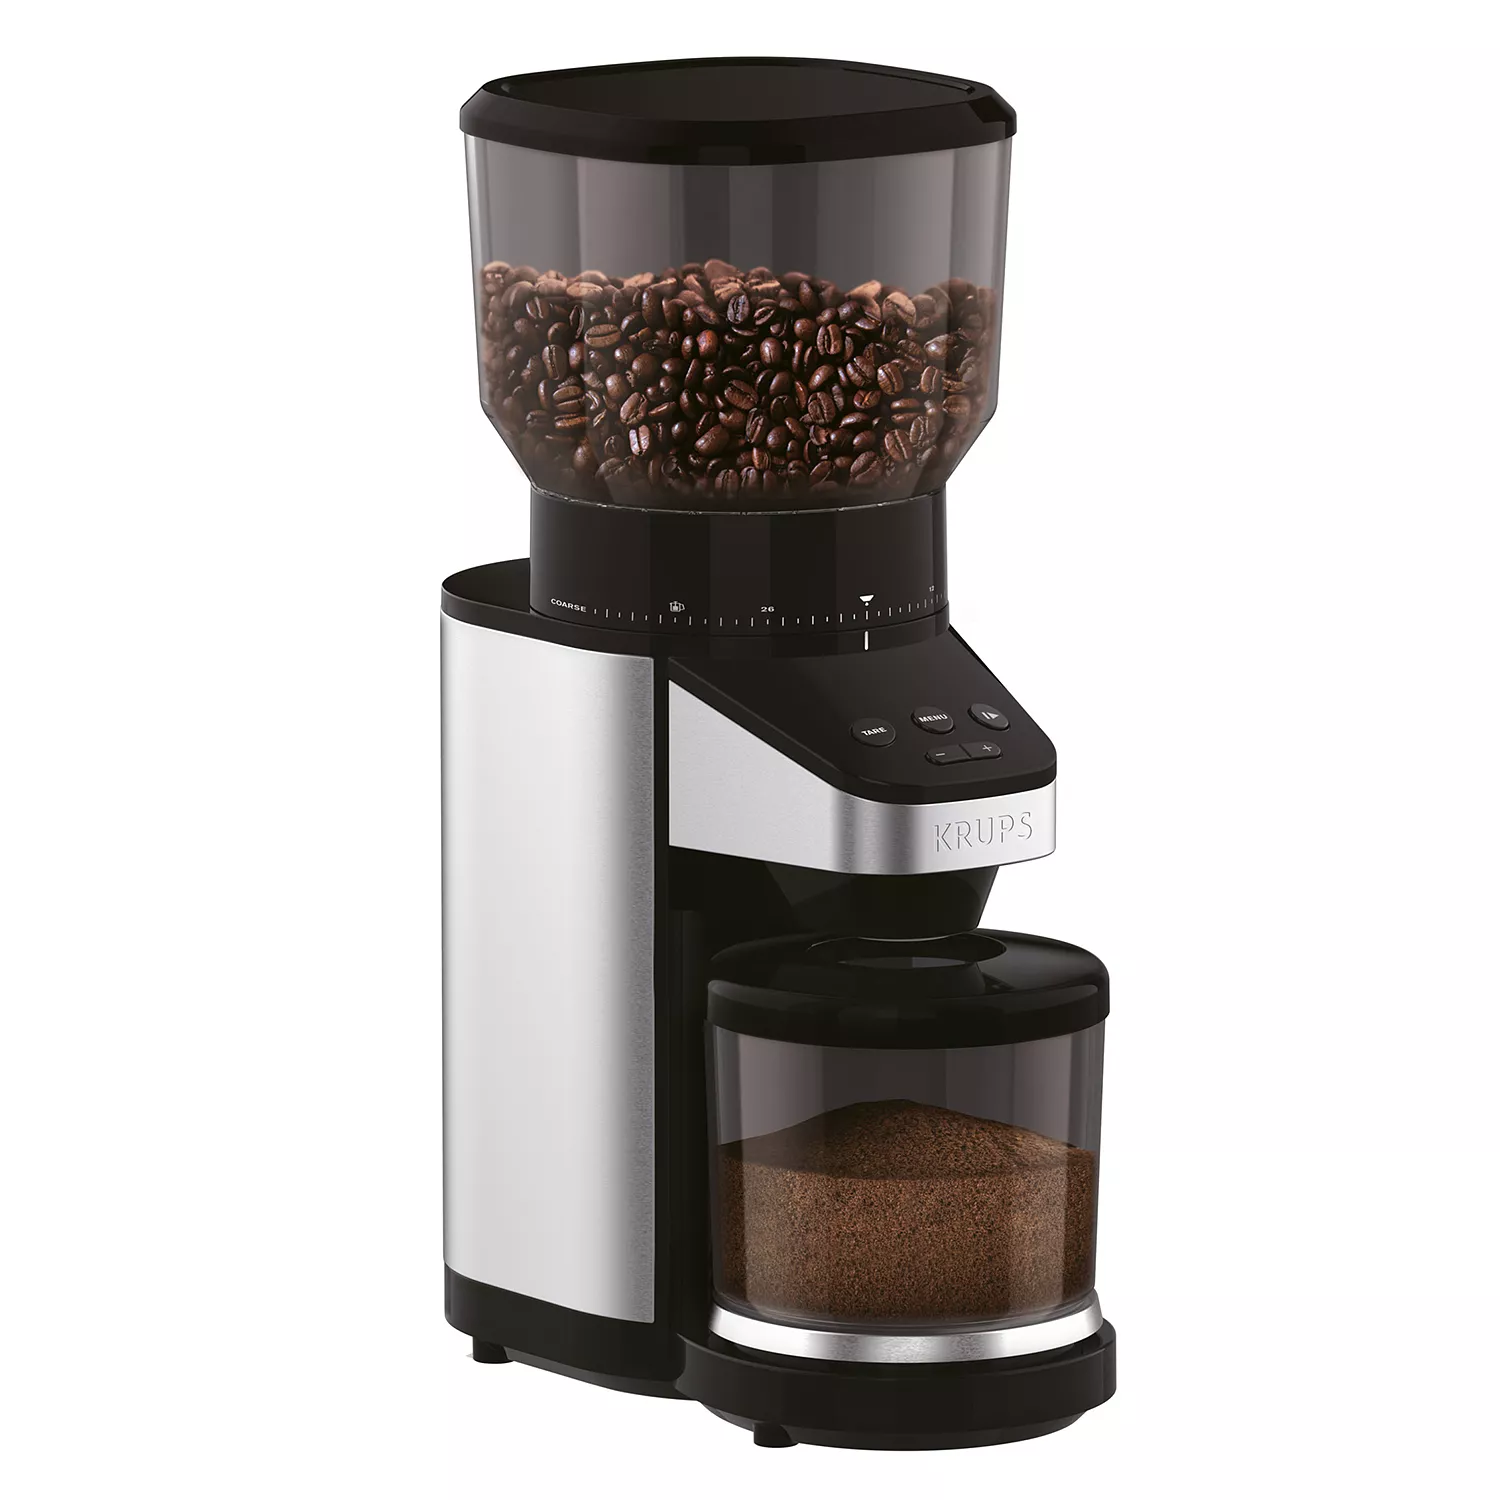 Krups Auto-Dose Grinder with Scale + Reviews